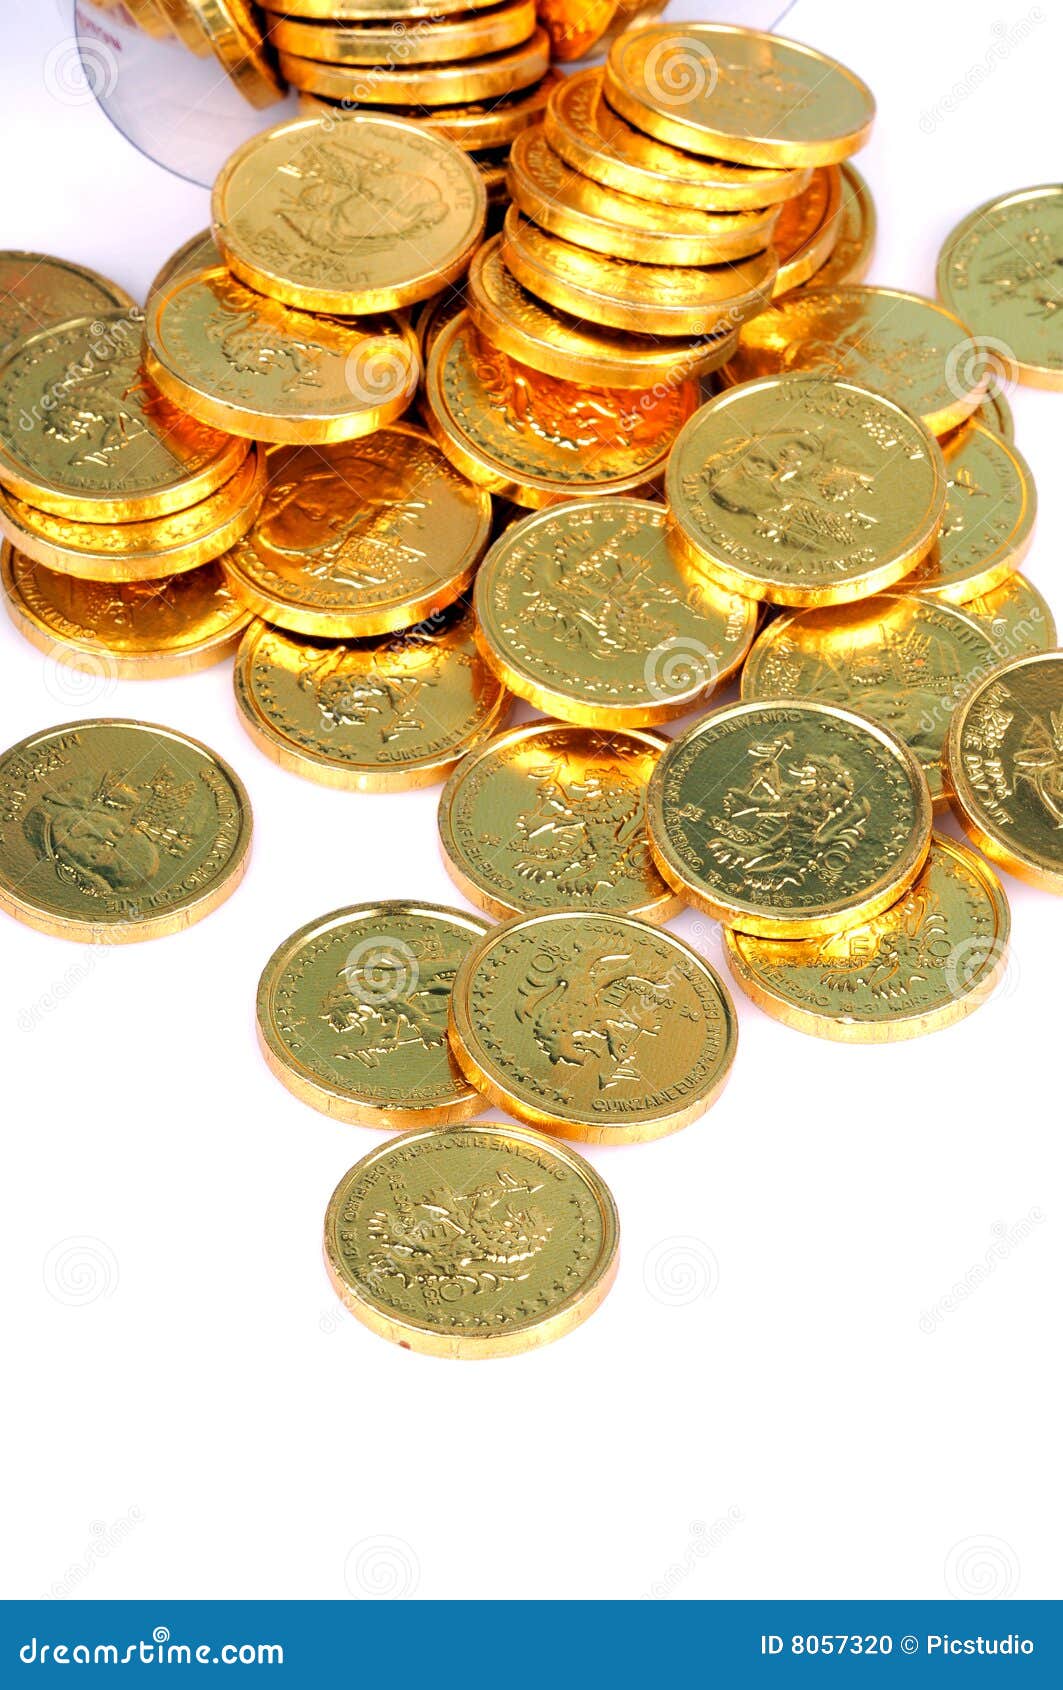 Gold coins stock photo. Image of copper, gold, number - 8057320